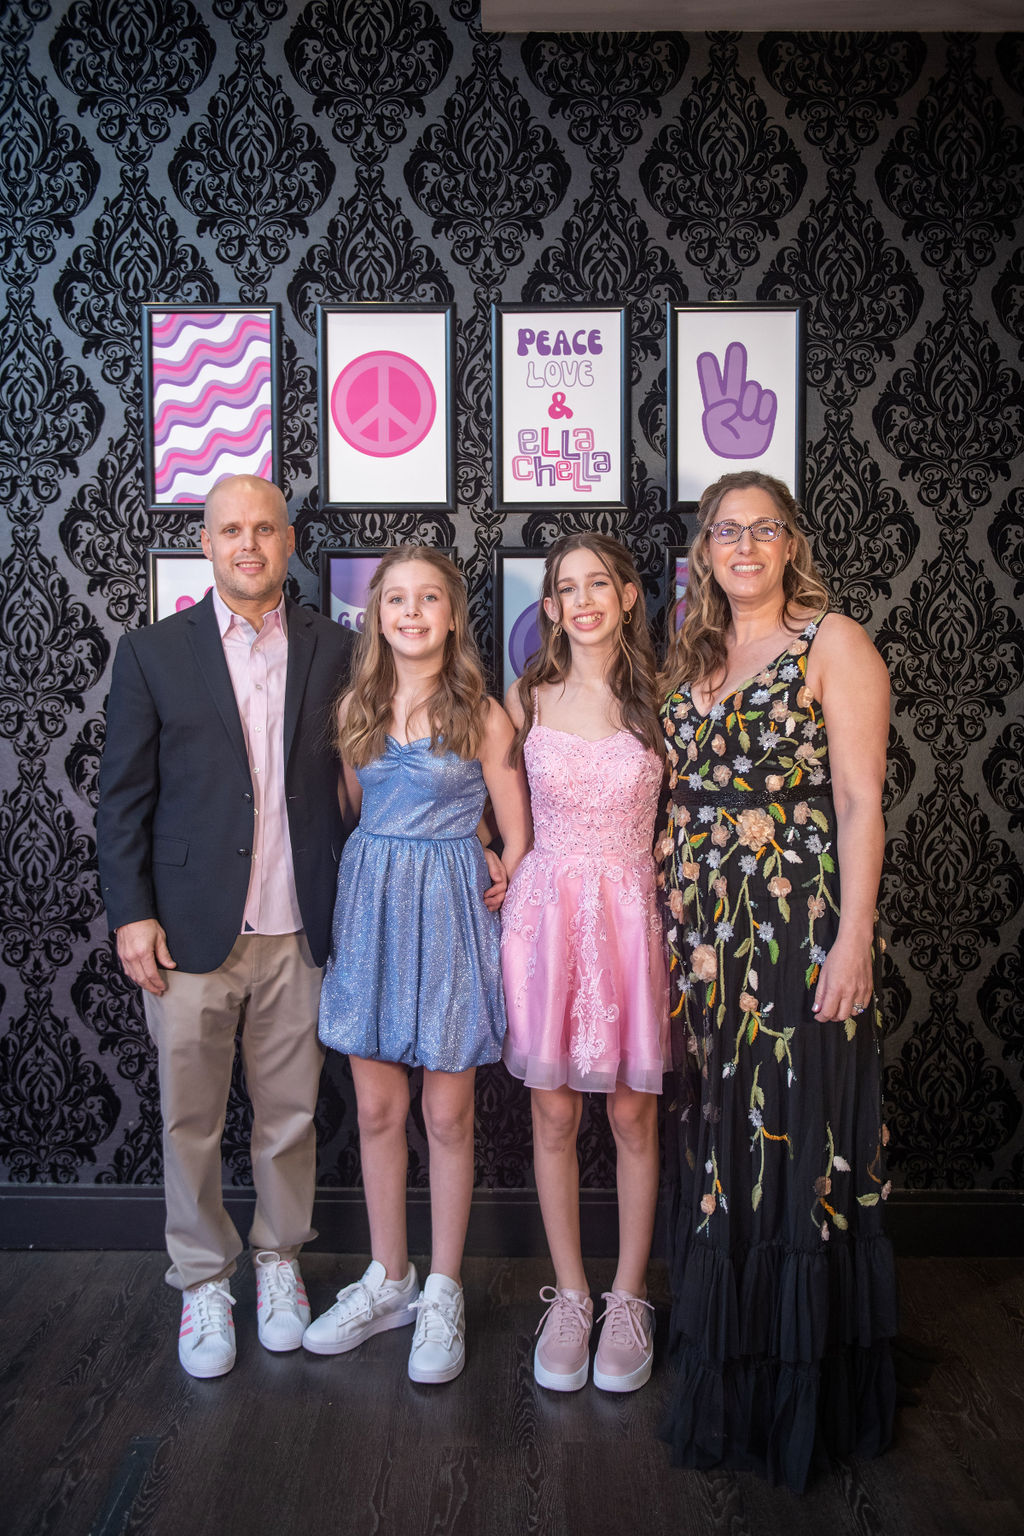 Ella and her awesome family at Ella Chella Coachella-inspired Bat Mitzvah Party at AMP in Bethesda, MD | Pop Color Events | Adding a Pop of Color to Bar & Bat Mitzvahs in DC, MD & VA | Photo by: Fillman Photo